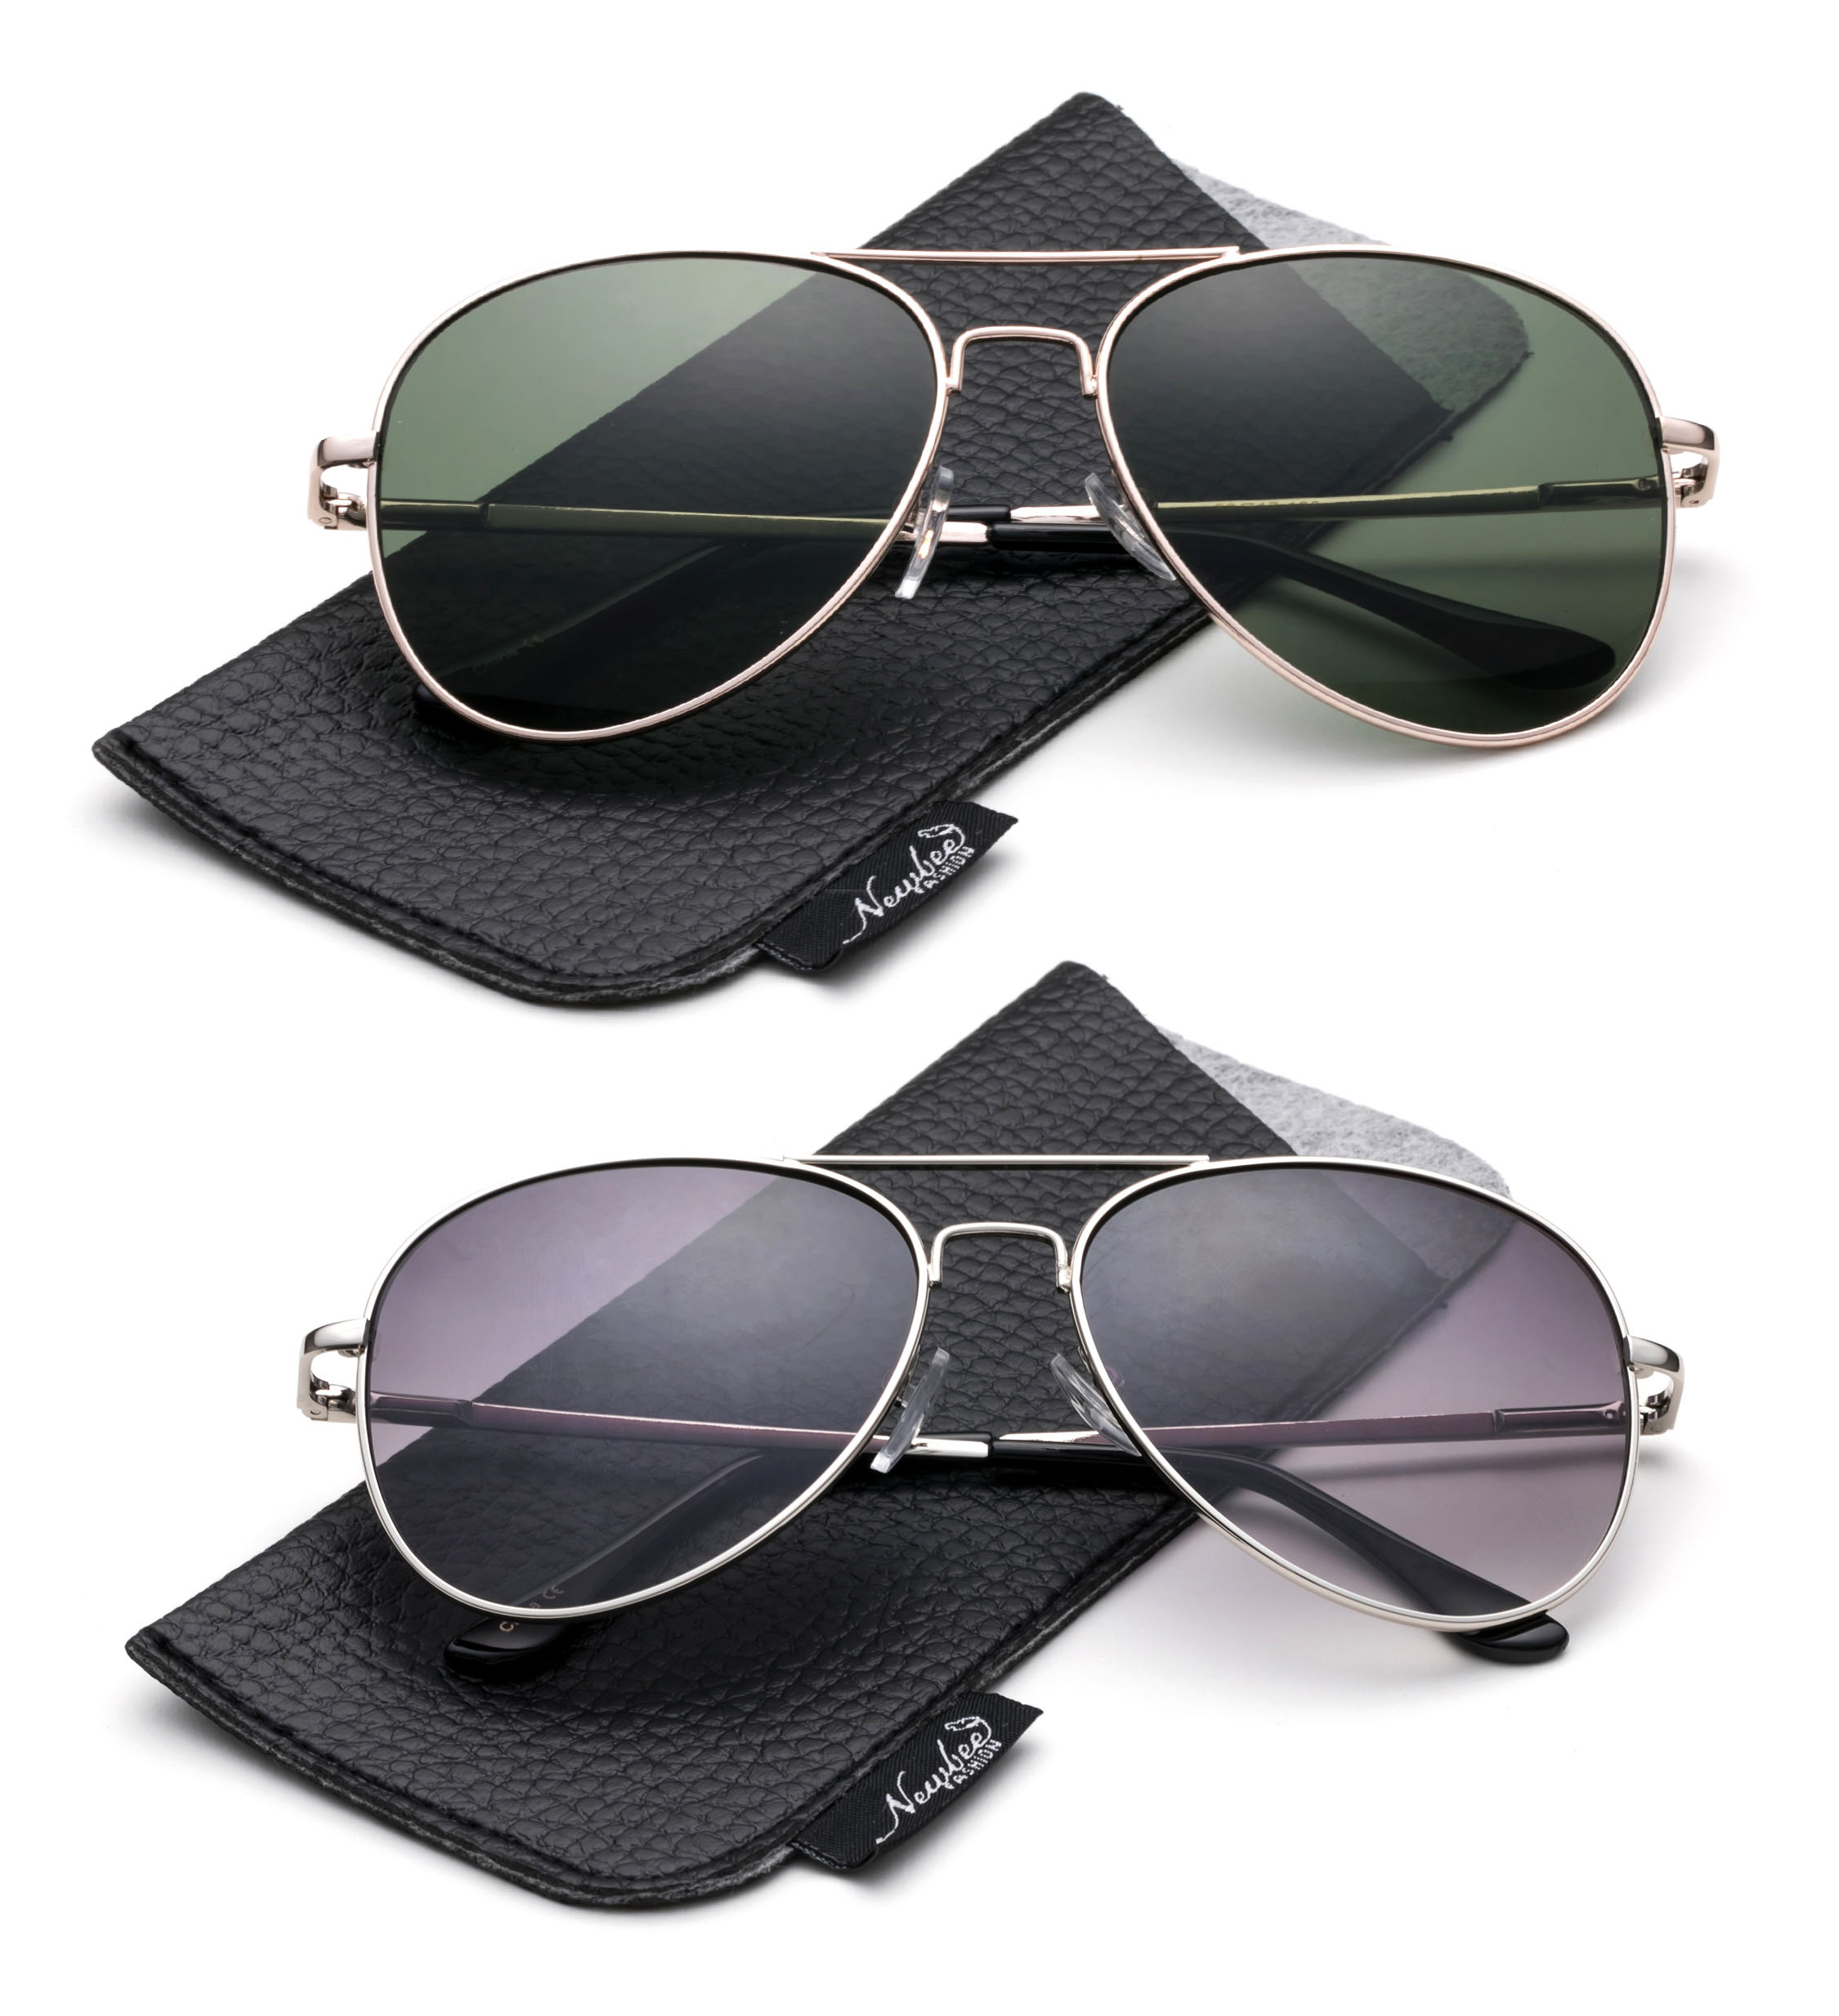 2 Pairs Classic Aviator Sunglasses for Men Metal Frame with Soft Case Lens with UV Protection - image 1 of 2